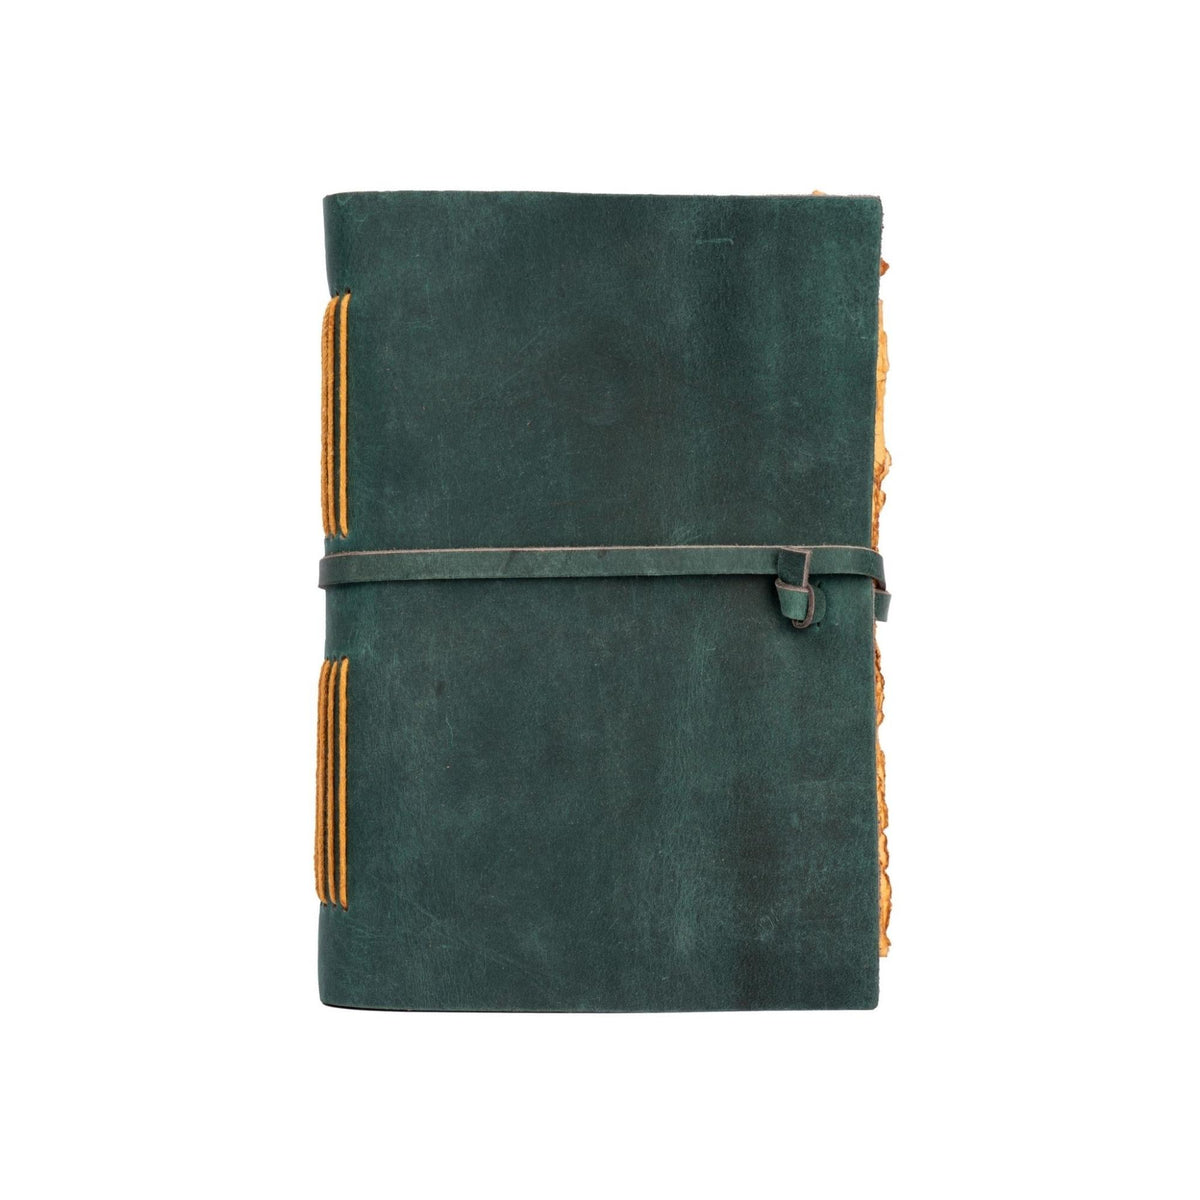 Leather Village turquoise colour handmade leather journal 